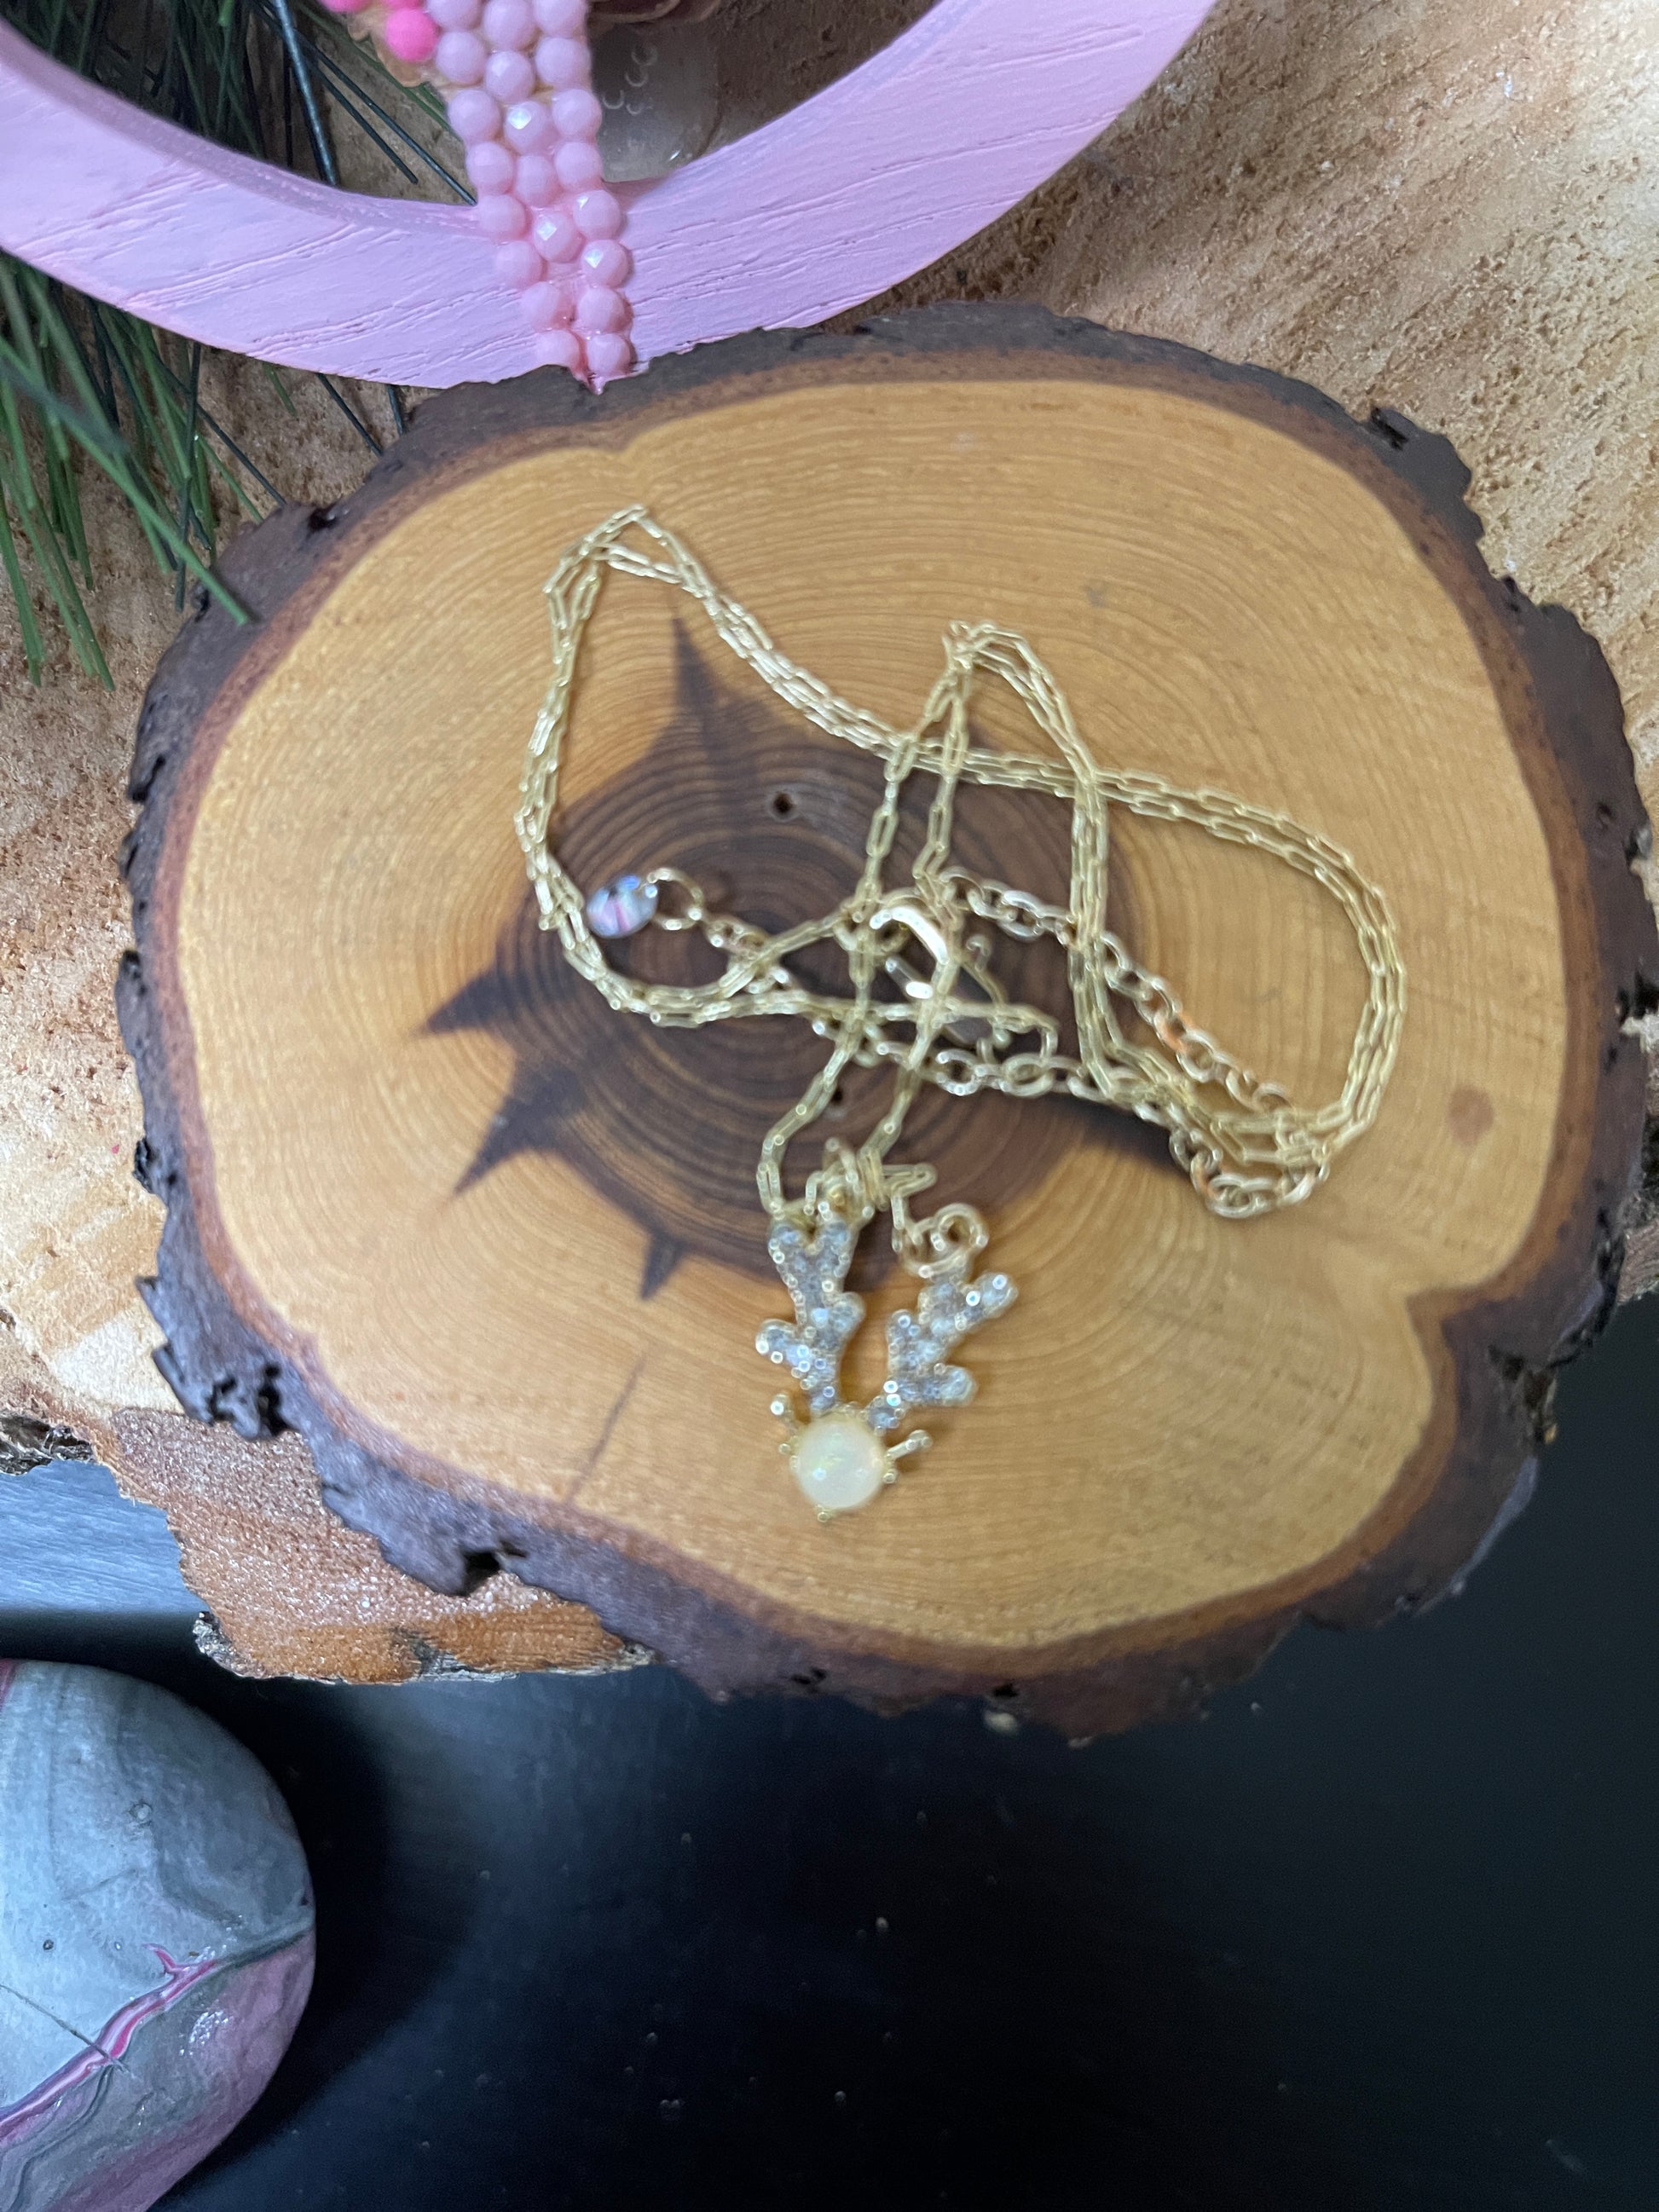 Reindeer Opal Pendant on a Gold Chain NecklacePink tiful of LOVE